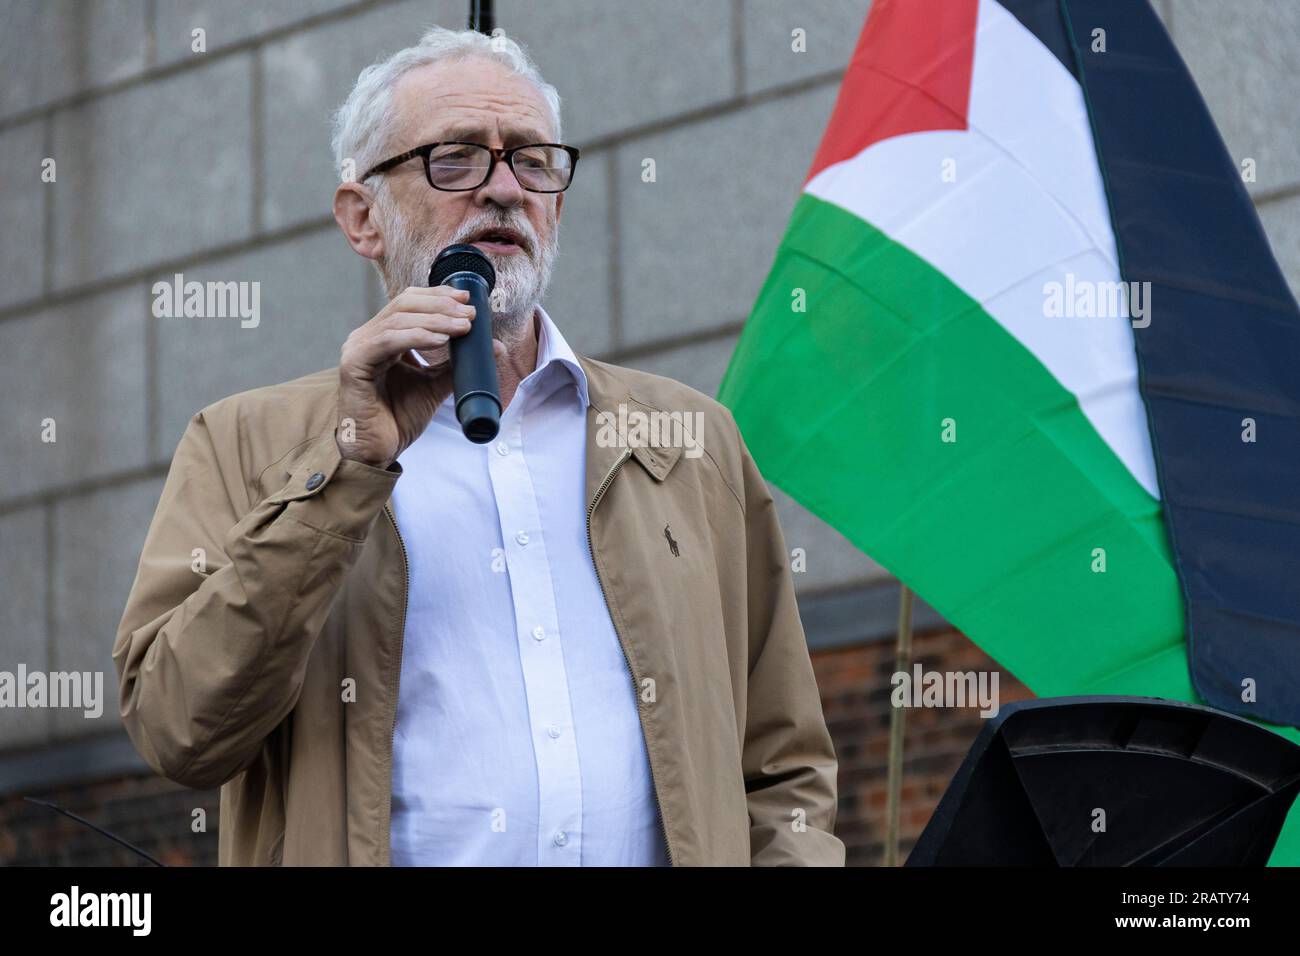 London, UK. 05th July, 2023. Jeremy Corbyn stood strong for Palestinian human rights today, delivering a moving speech that resonated amongst a diverse crowd. Hundreds of demonstrators, including members of various Jewish groups, convened outside the Israeli Embassy in London. Unifying under a single cause, they expressed a fervent outcry against the alleged genocide by the Israeli government in Jenin. Today, the voice of protest rang loud in the heart of Britain. Credit: Sinai Noor/Alamy Live News Stock Photo